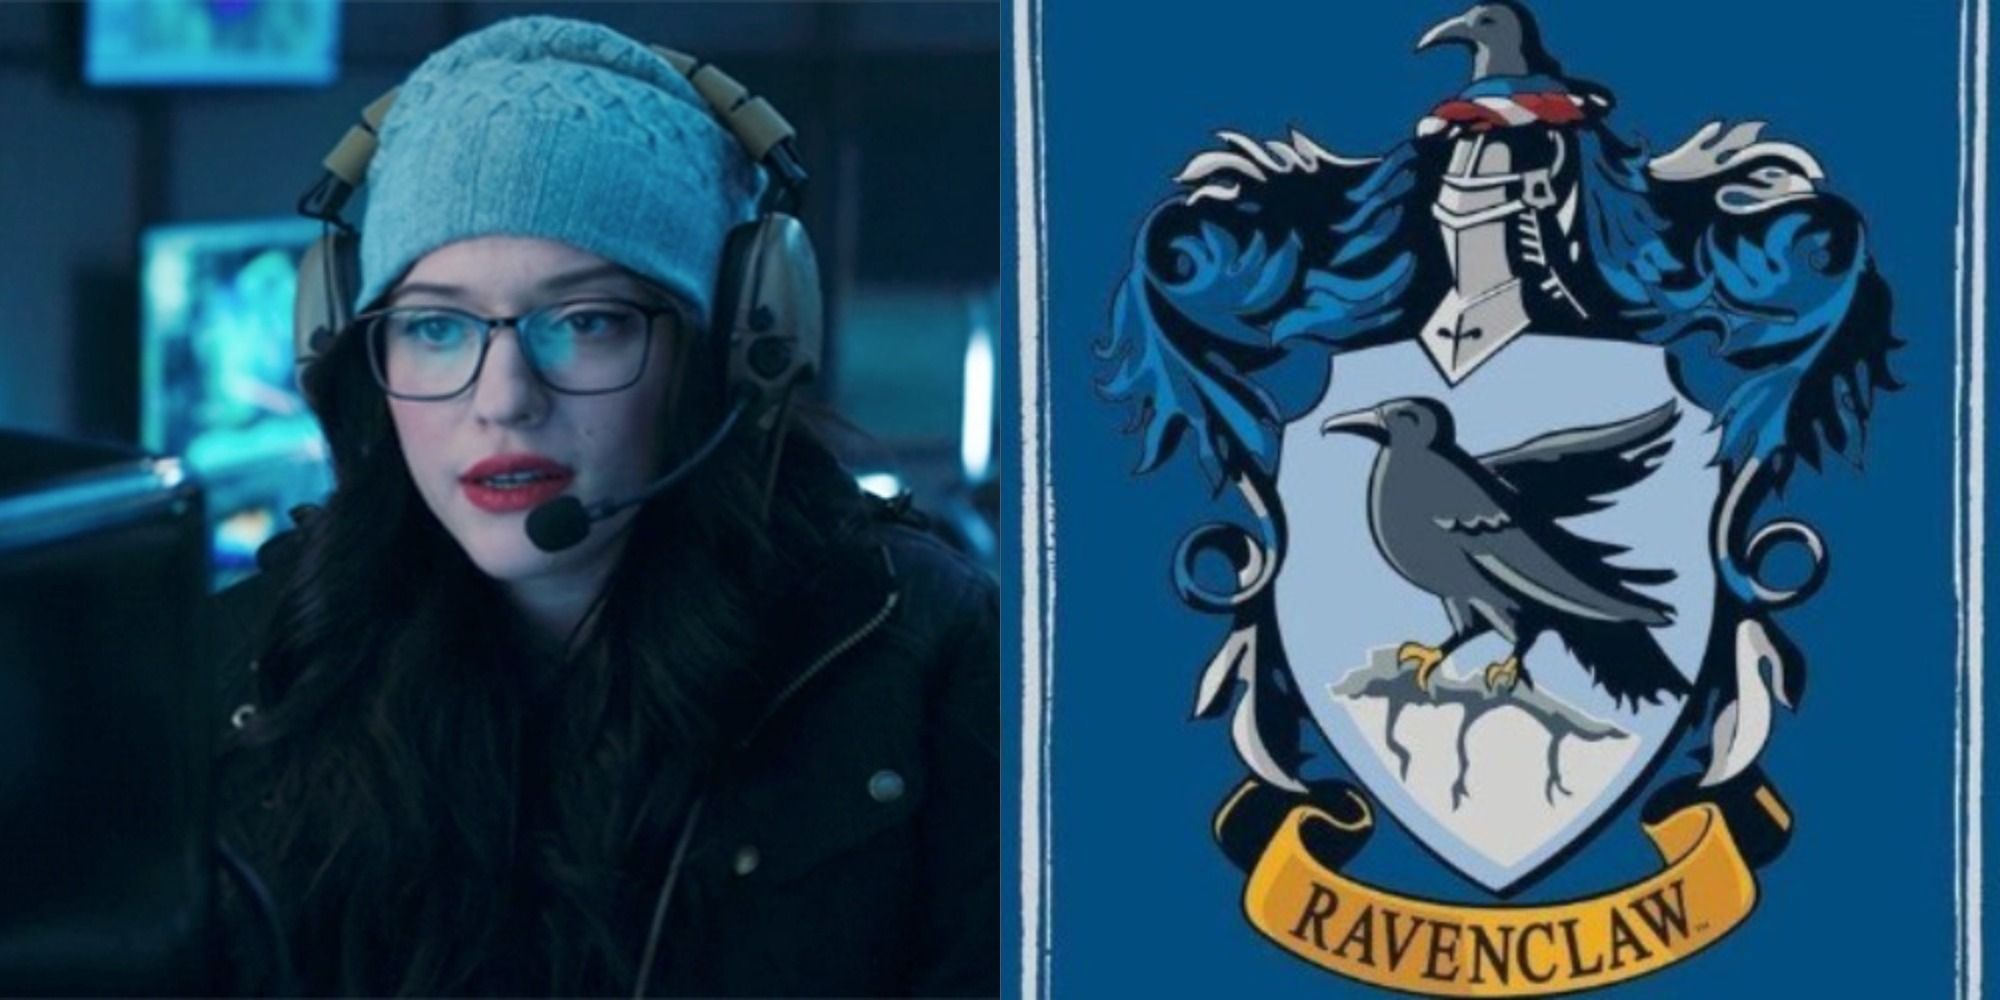 A split image of Darcy Lewis speaking into a microphone and the Ravenclaw logo